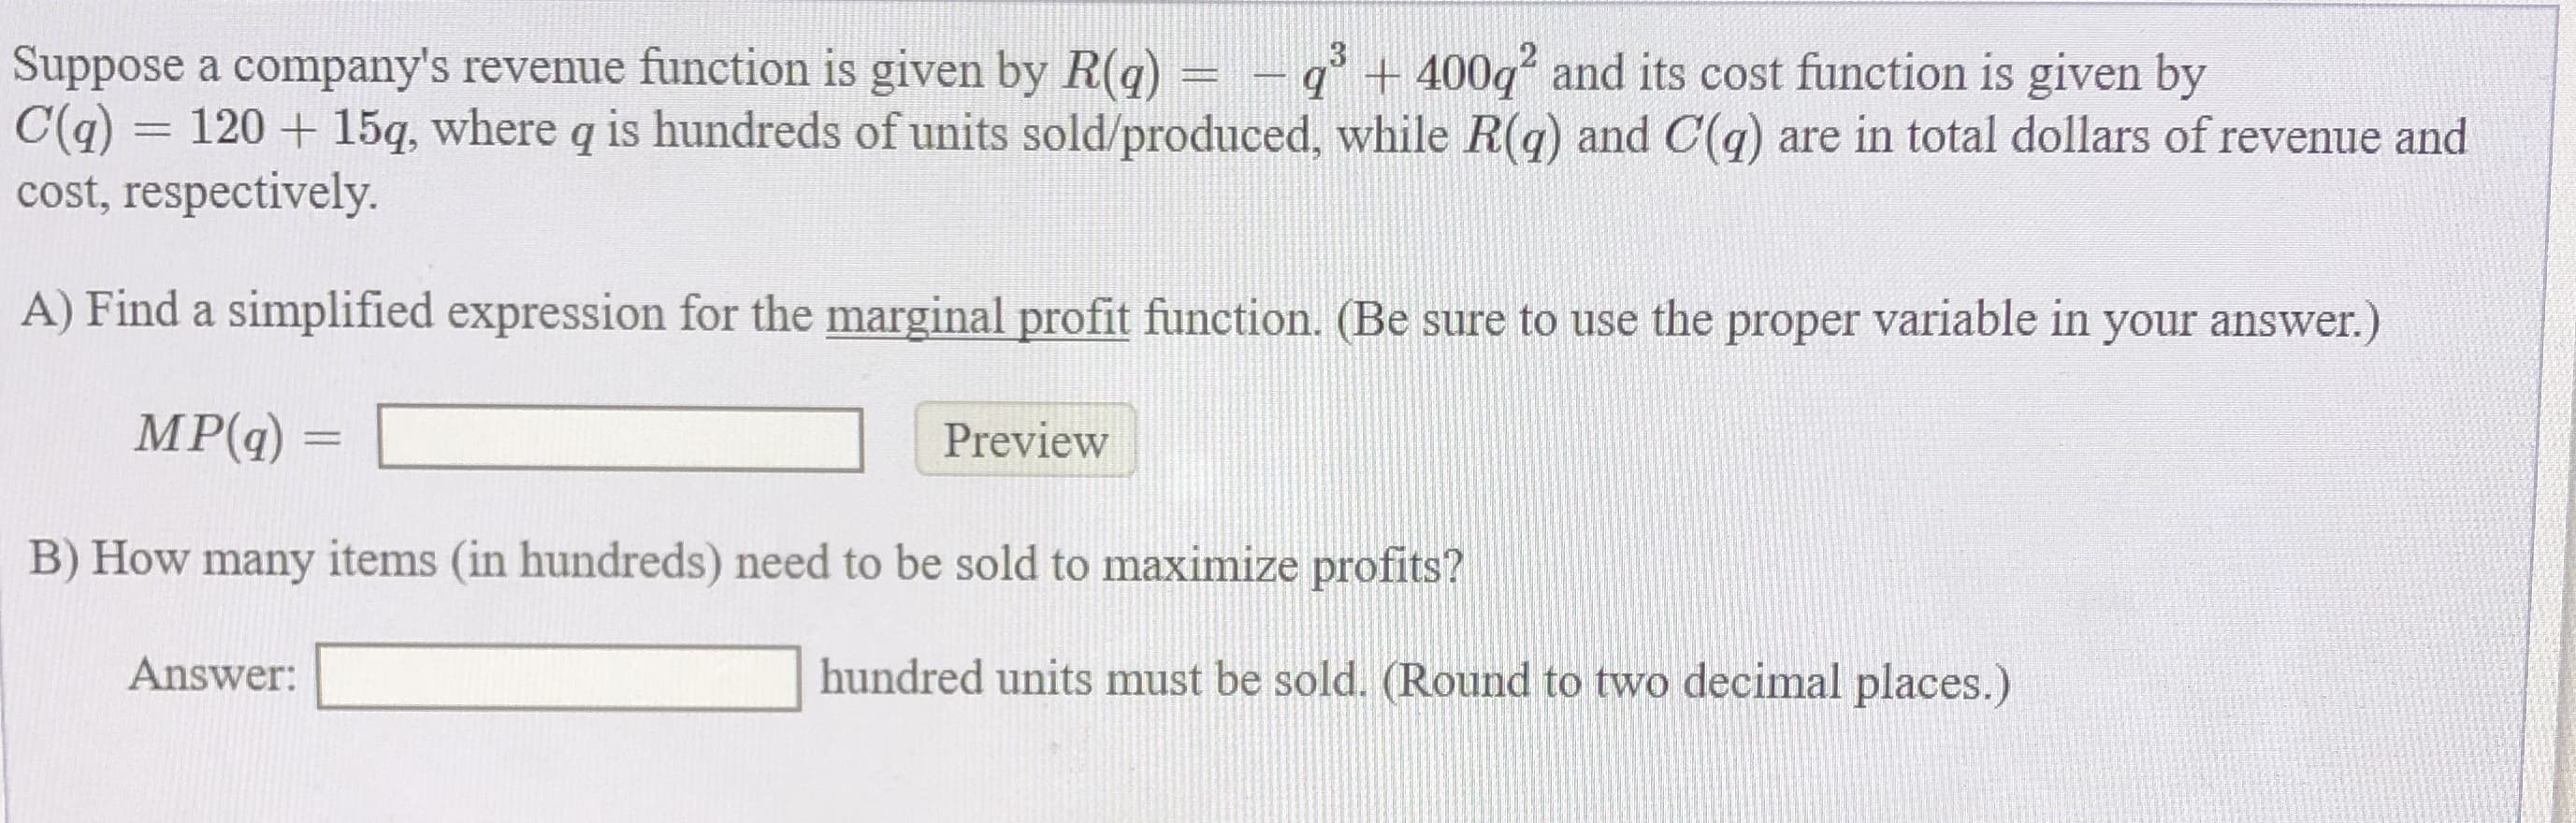 Suppose a company's revenue function is given by R(q) =
9+ 400g and its cost function is given by
C(a) = 120 + 15q, where q is hundreds of units sold/produced, while R(q) and C(q) are in total dollars of revenue and
cost, respectively.
A) Find a simplified expression for the marginal profit function. (Be sure to use the proper variable in your answer.)
MP(g)
Preview
B) How many items (in hundreds) need to be sold to maximize profits?
Answer:
hundred units must be sold. (Round to two decimal places.)
